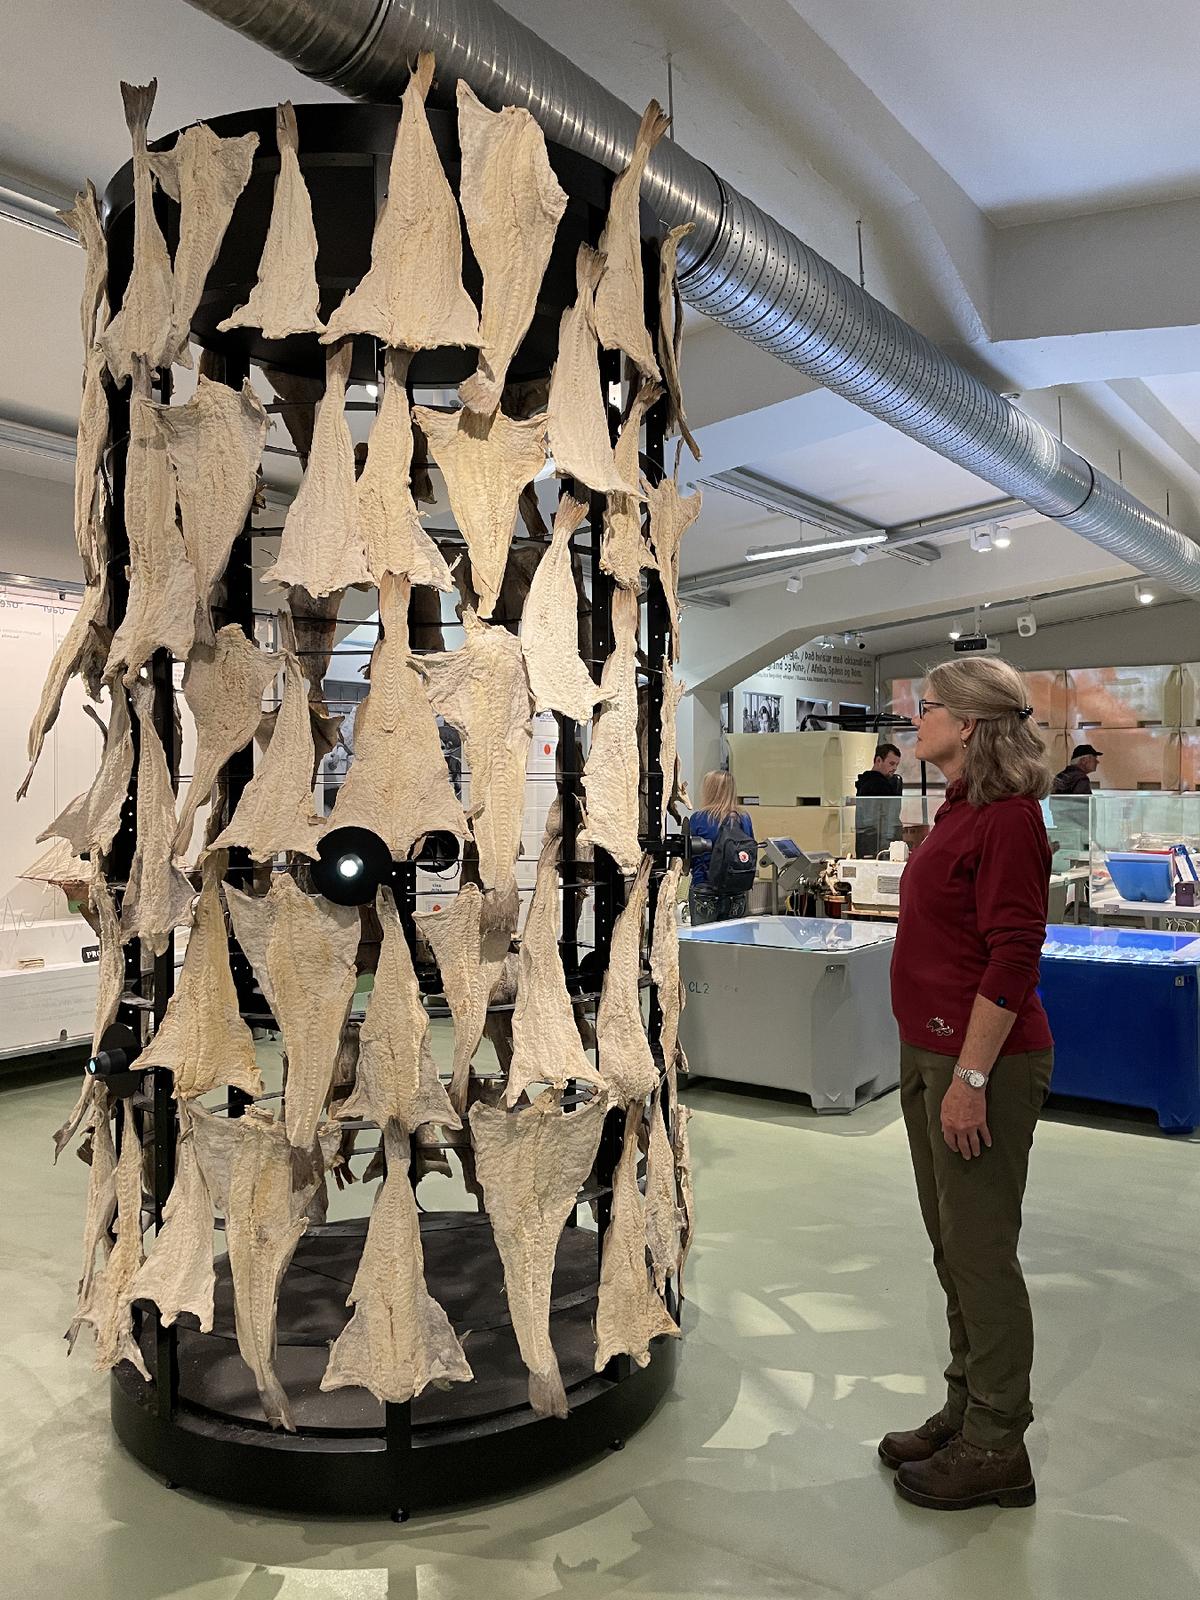 A visitor at Reykjavik’s Maritime Museum stands by a display of salted fish like those her grandparents once enjoyed. (Photo courtesy of Lesley Frederikson)